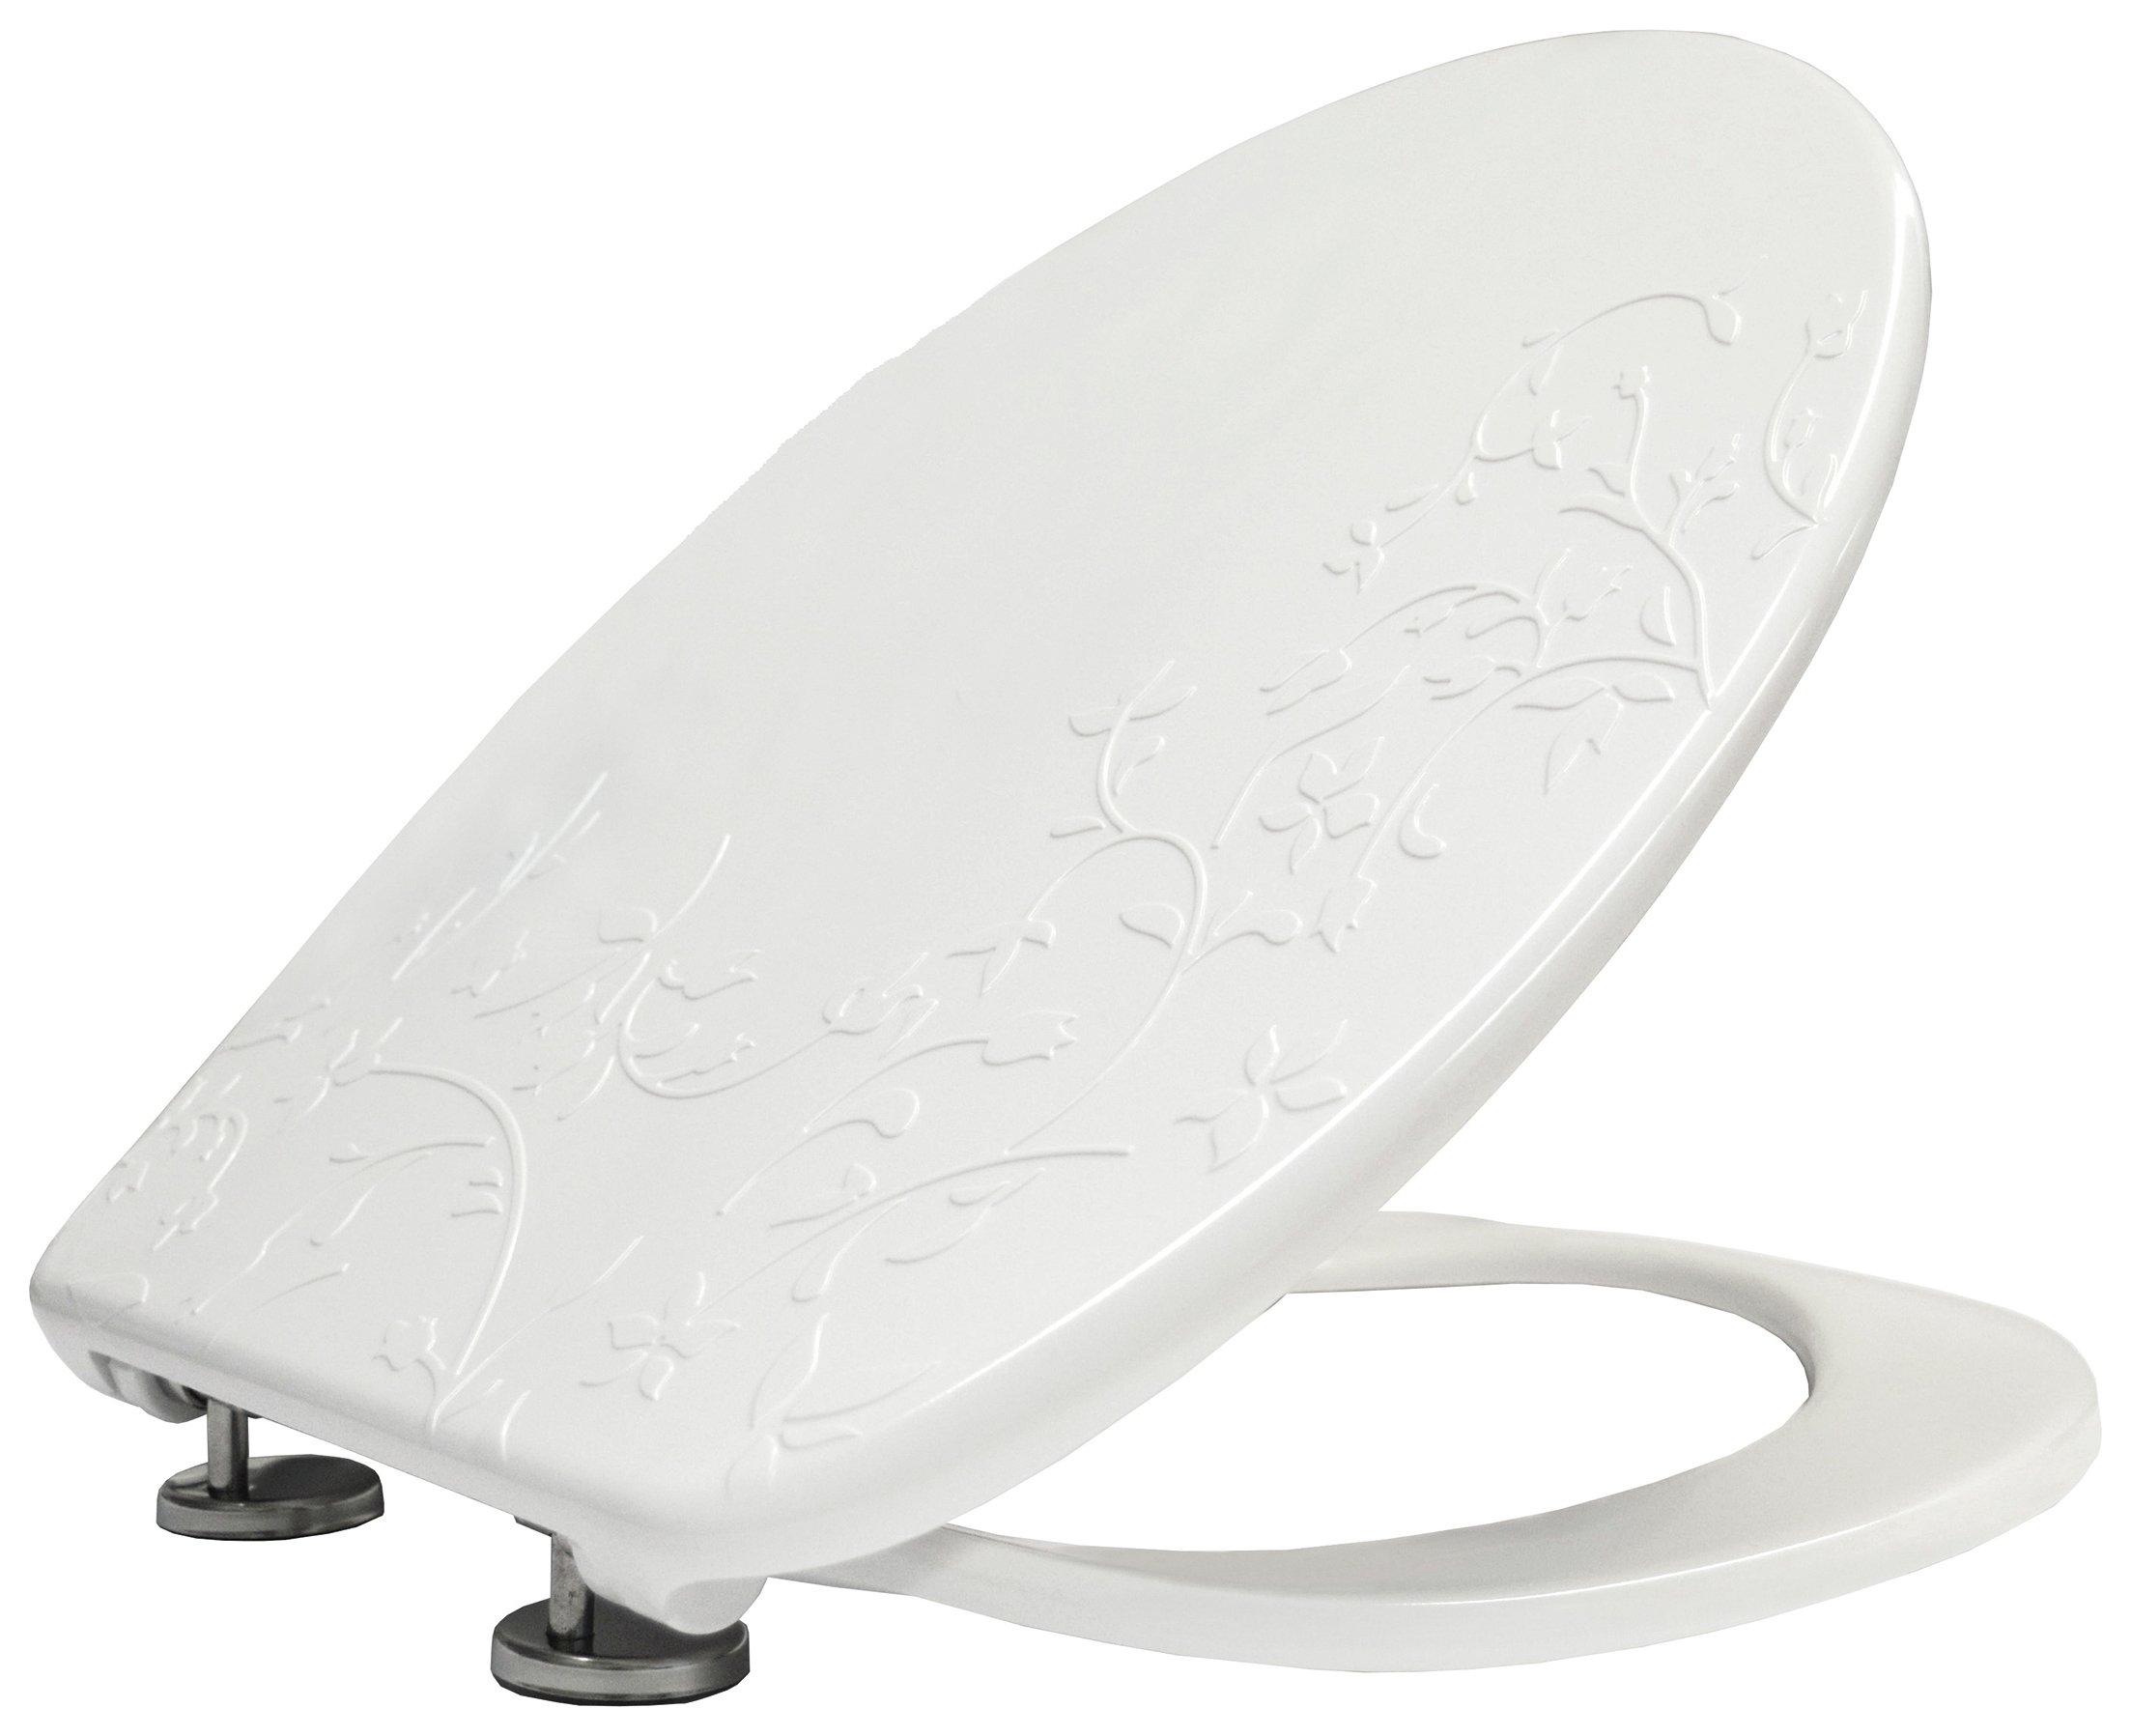 Bemis Fiore Thermoplastic Slow Close Toilet Seat Review